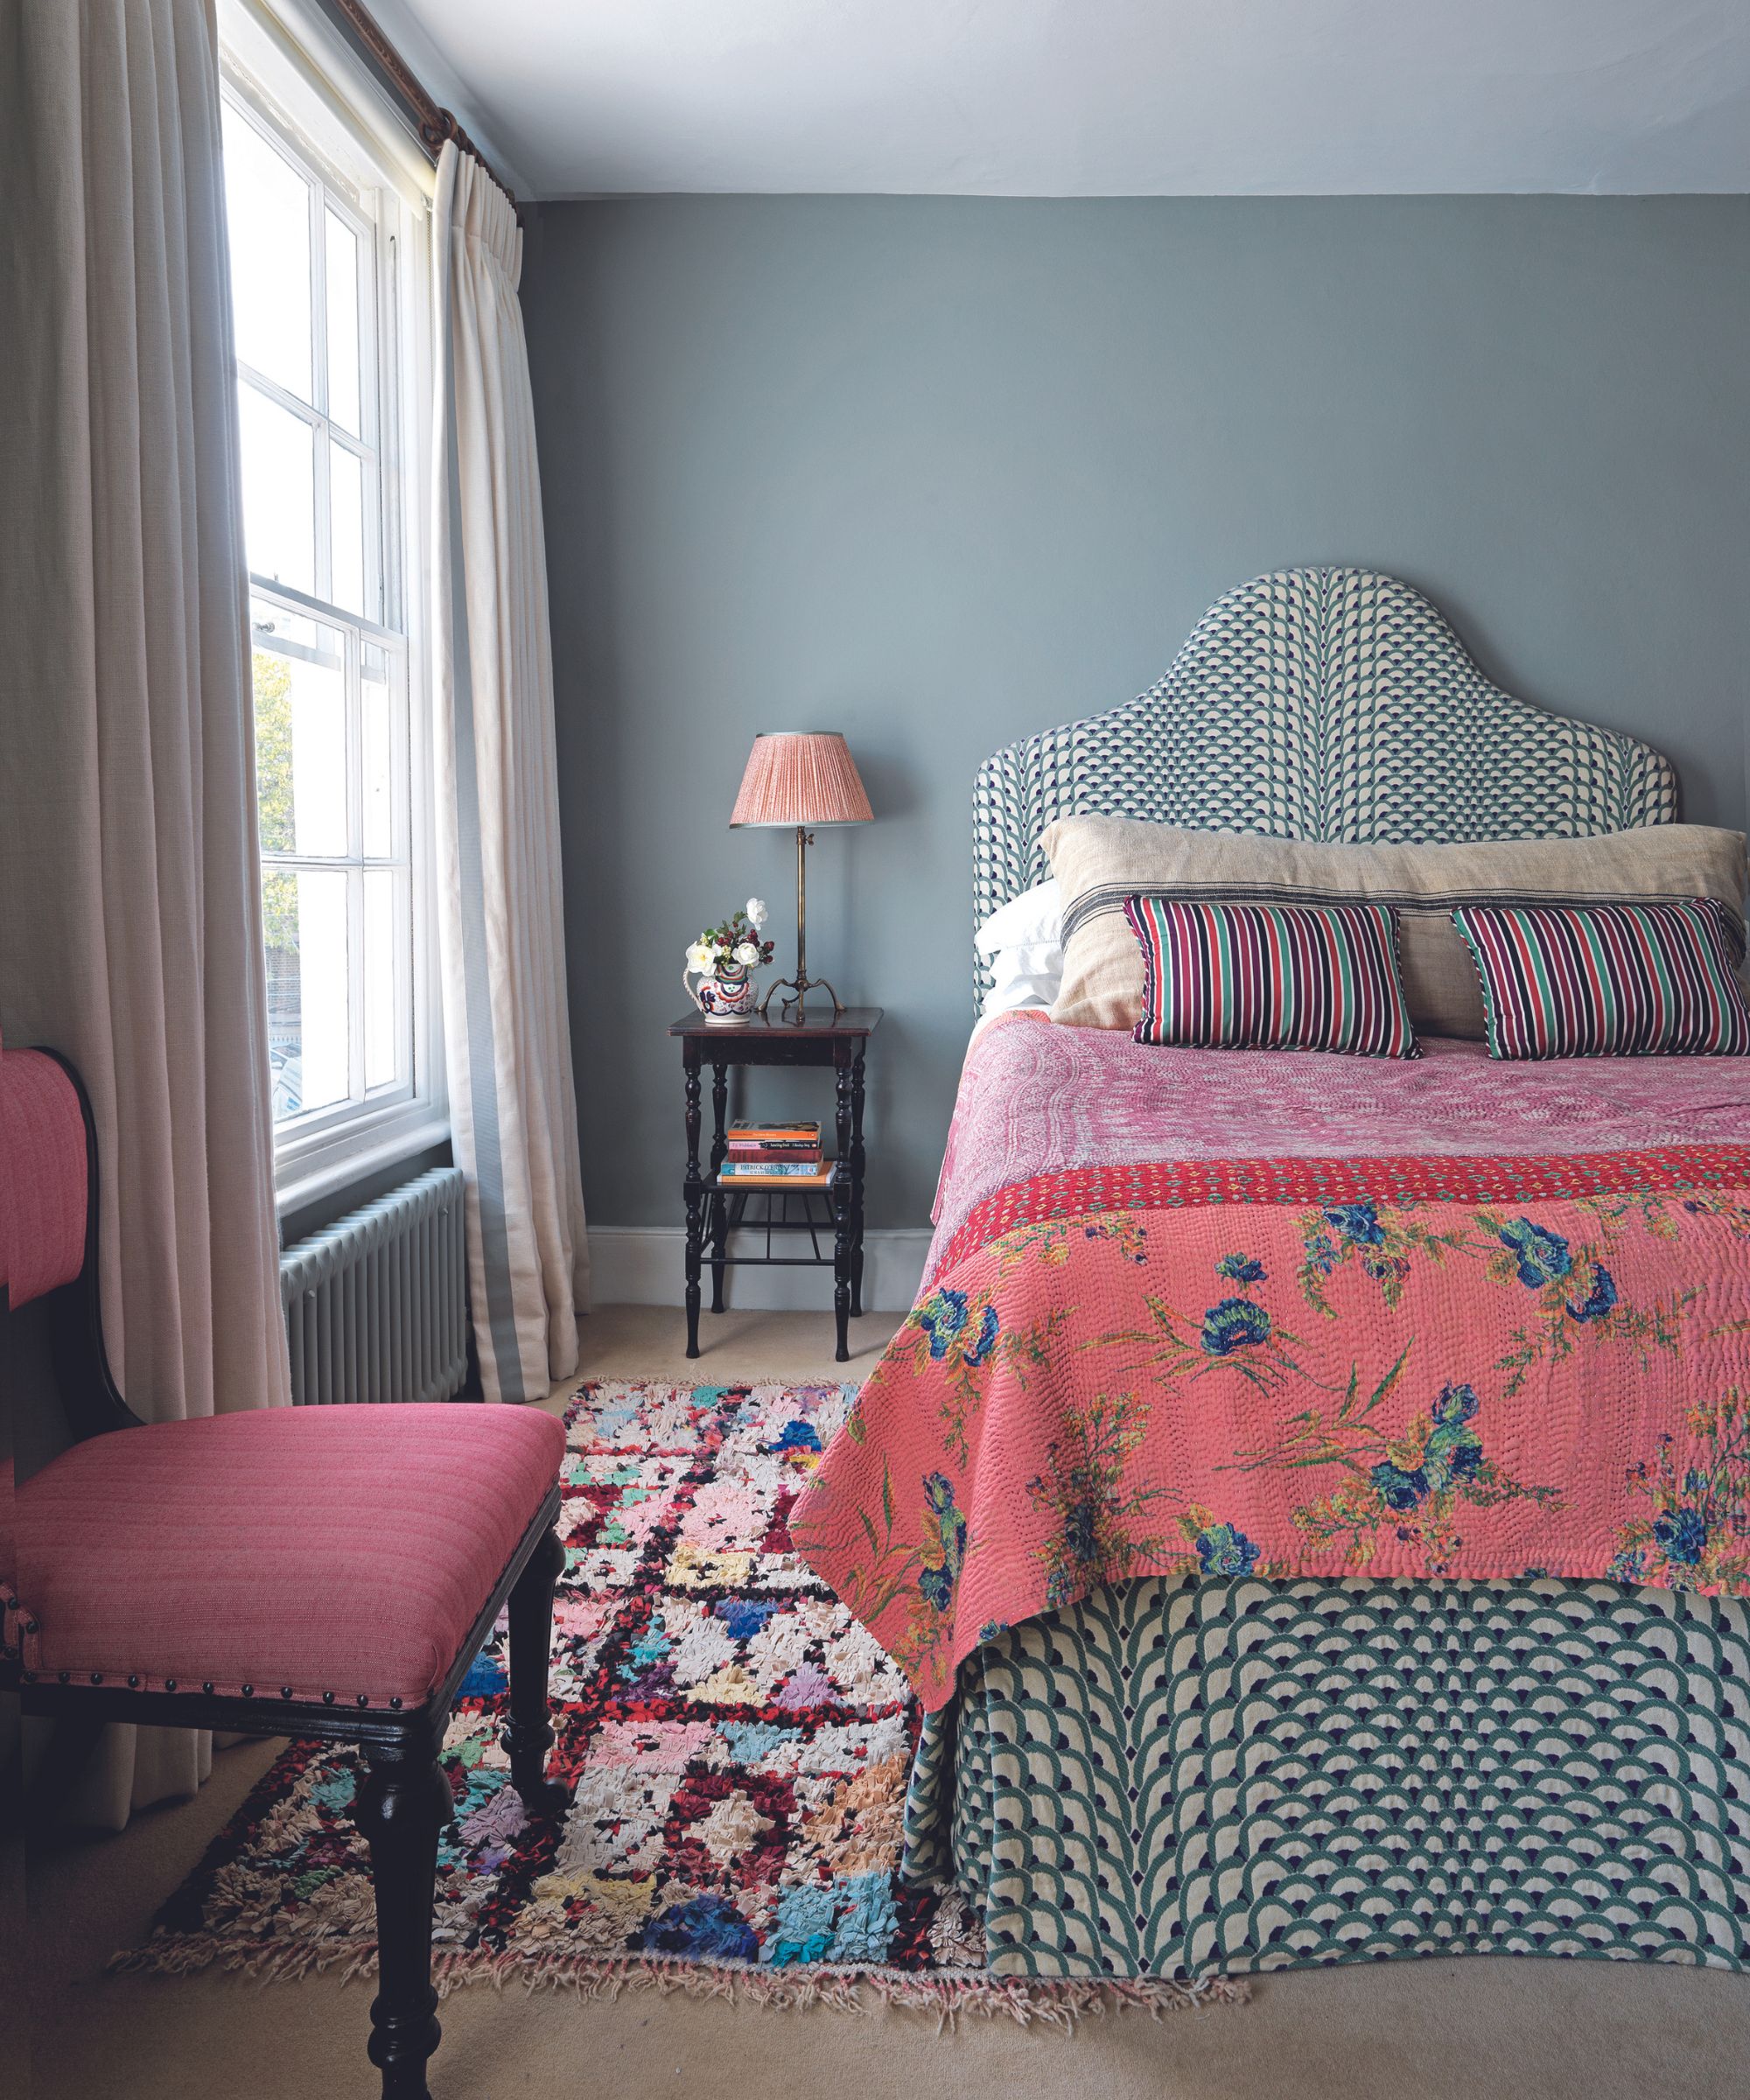 Guest bedroom with mix of pattern